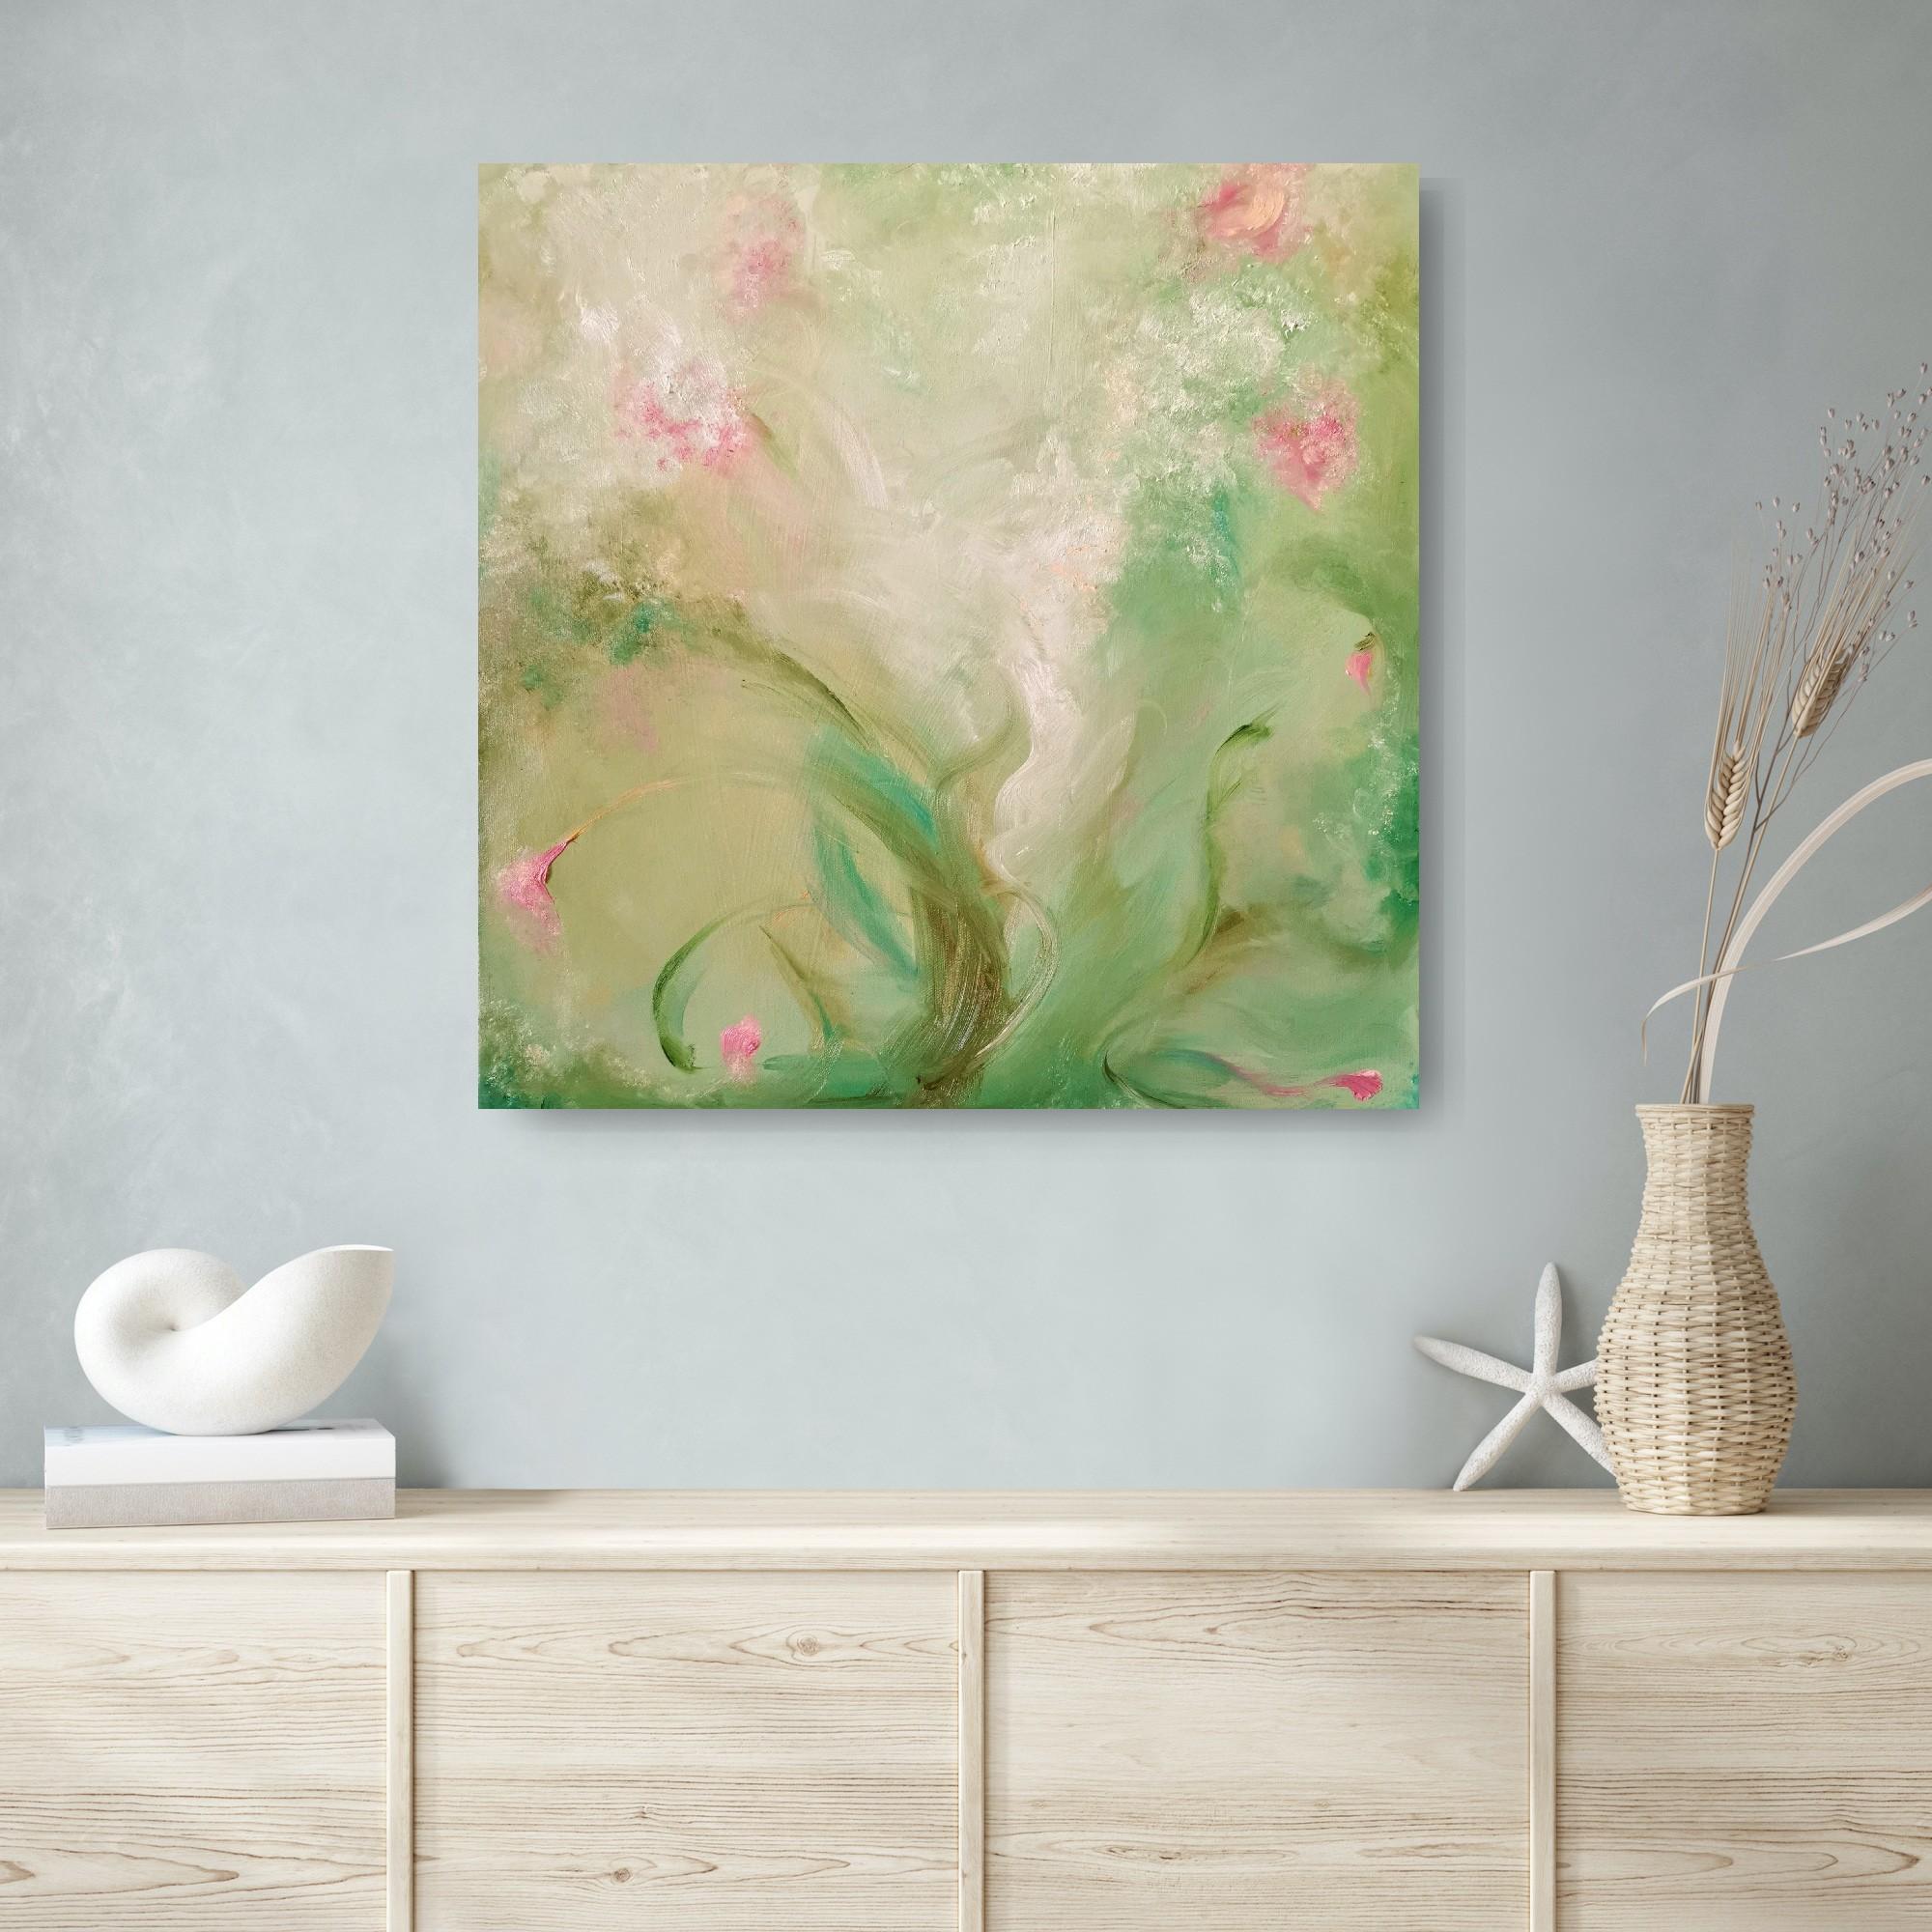 A most verdant spring - Whimsical green and pink abstract painting 7